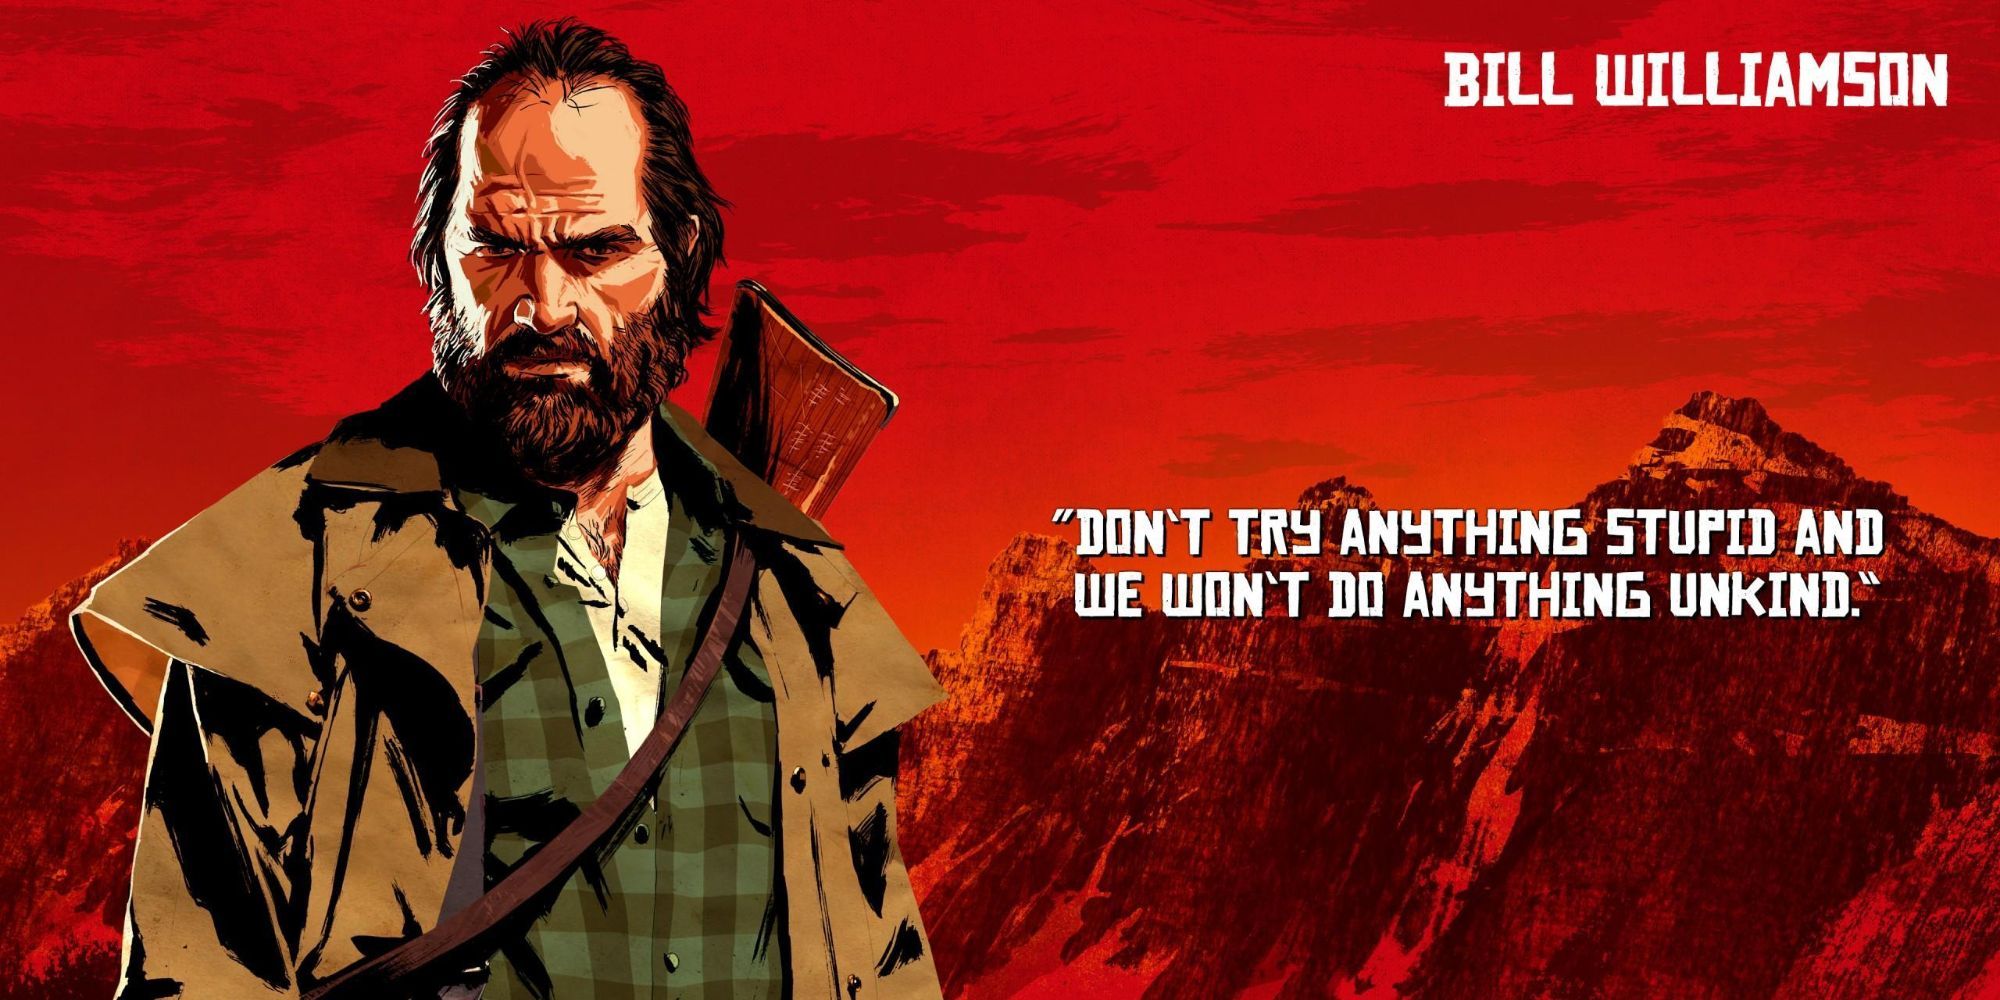 RDR2 art of Bill with quote